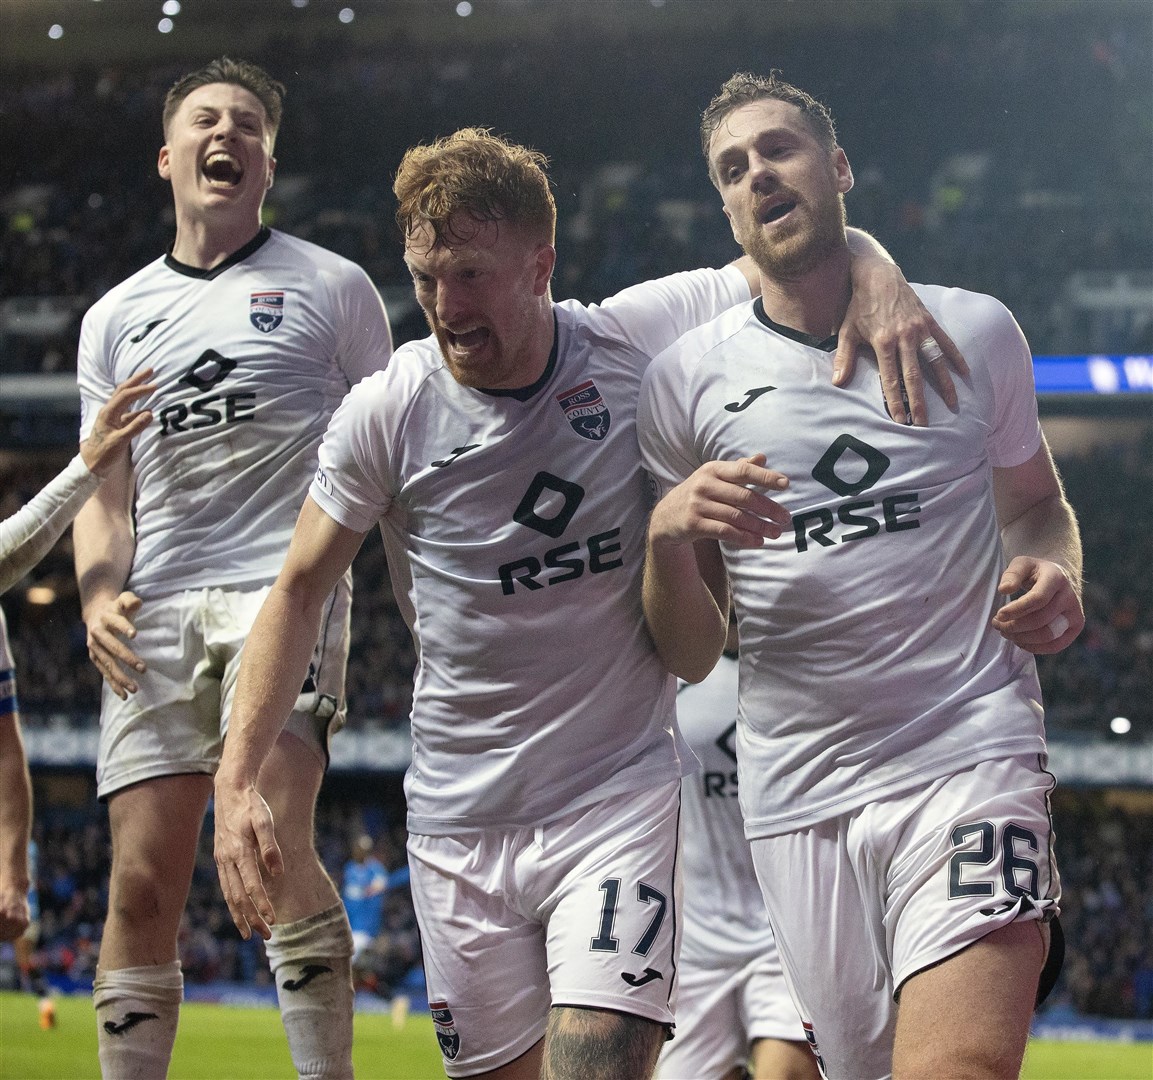 Ross County's Jordan White celebrates scoring in a defeat at Ibrox in February 2023.